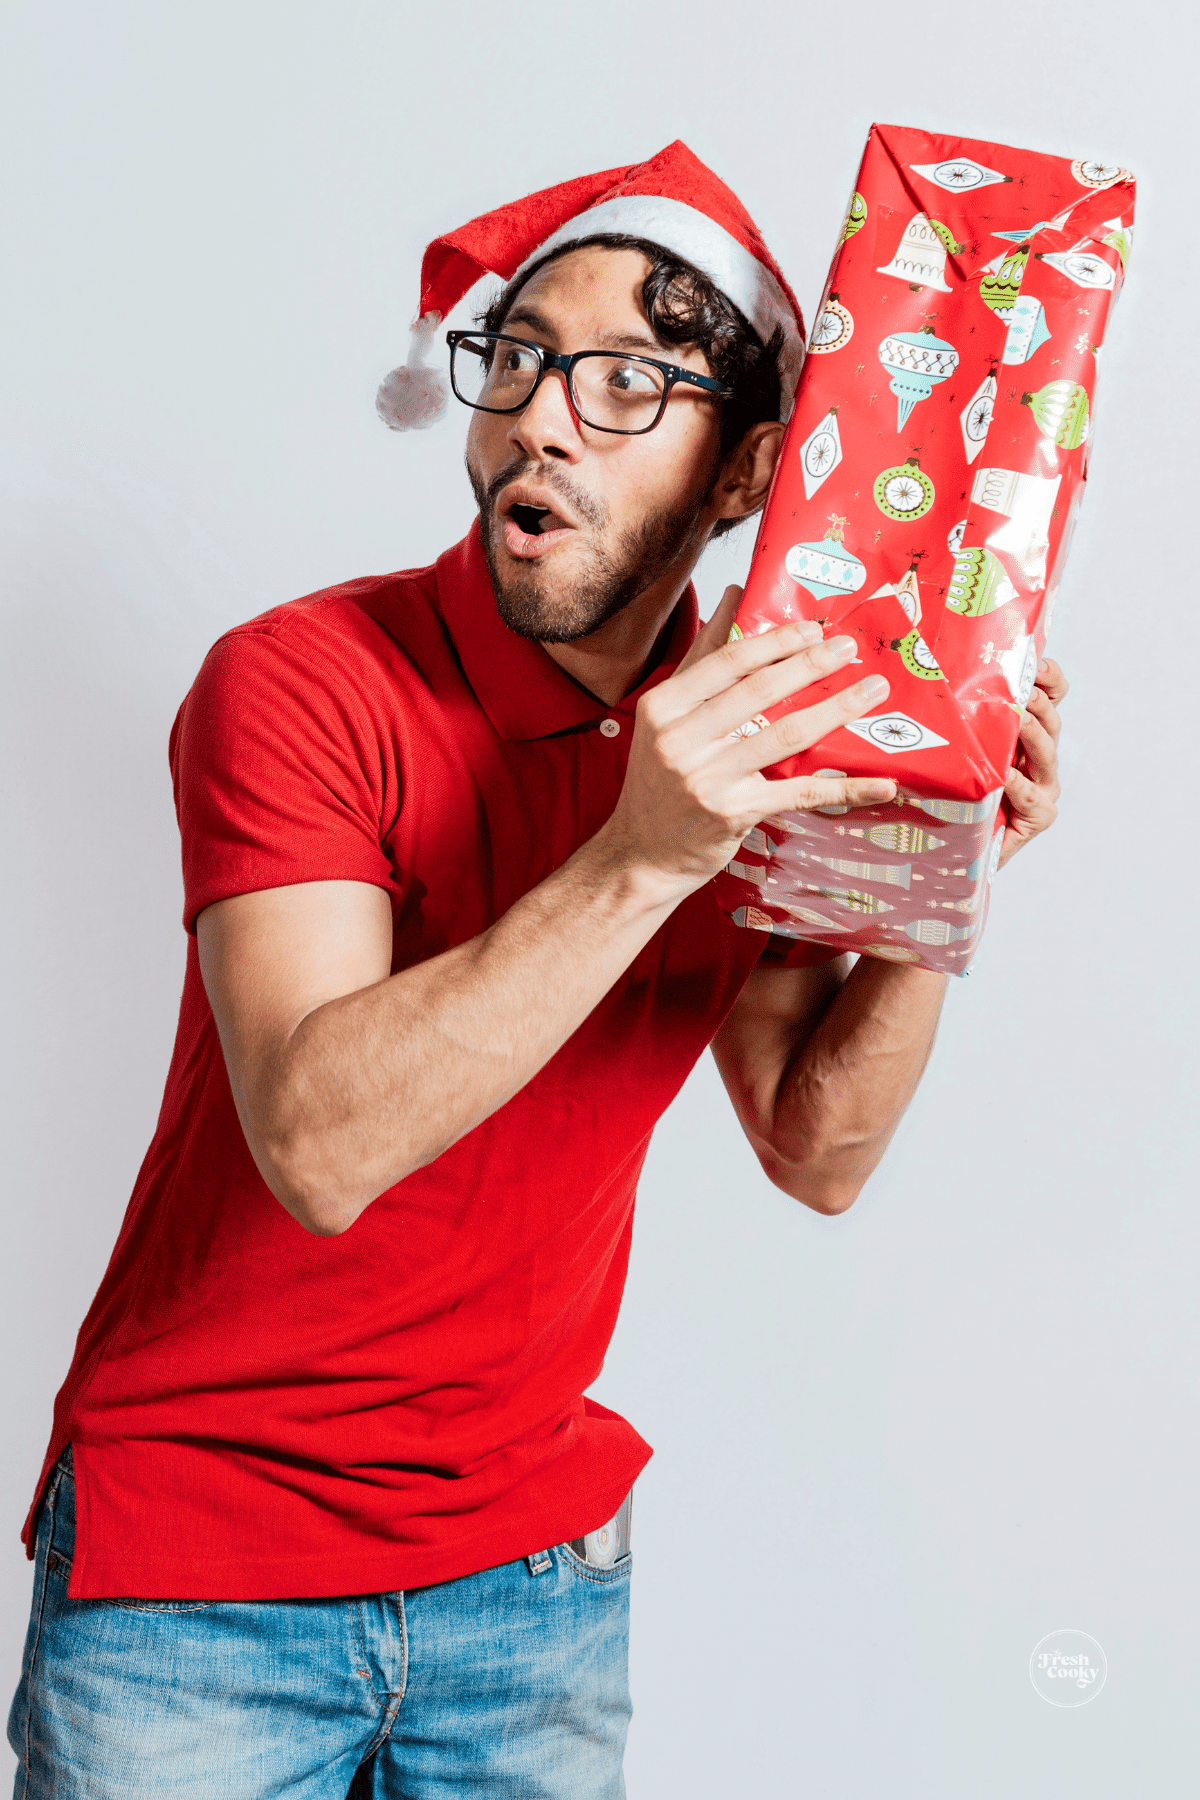 College guy holding a Christmas package up with a surprised look on his face.